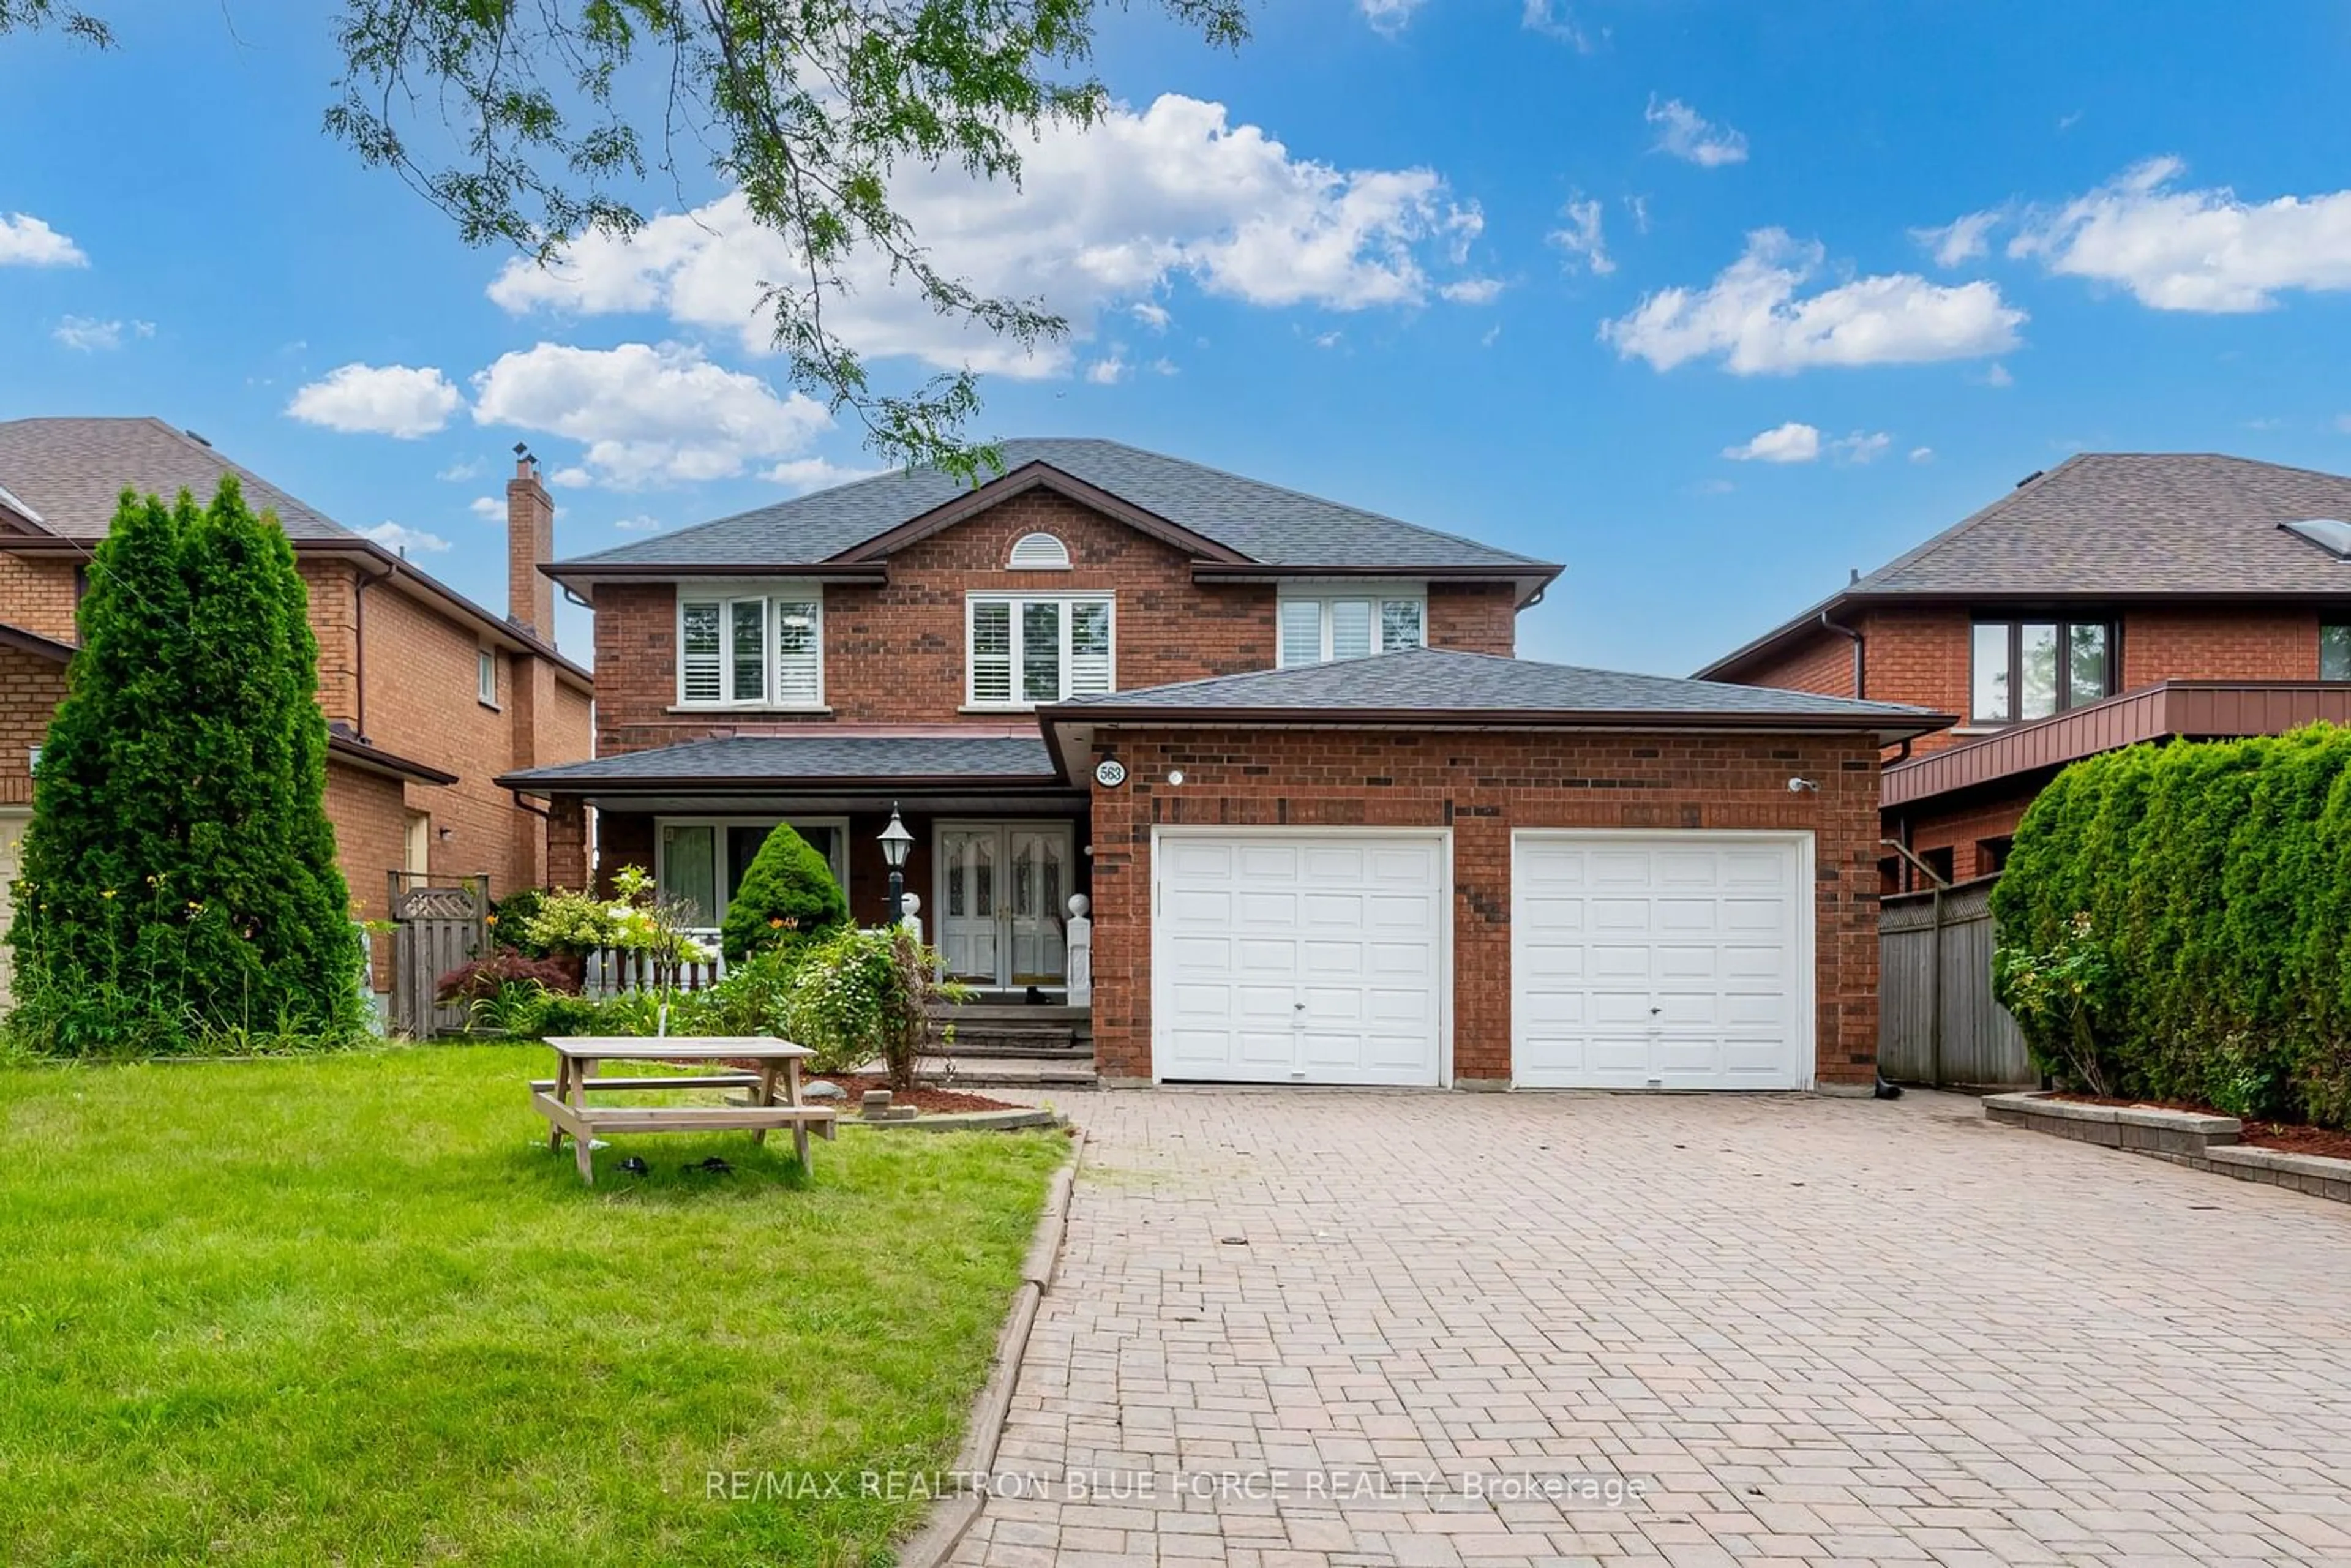 Home with brick exterior material for 563 Lombardy Ave, Oshawa Ontario L1J 8H5